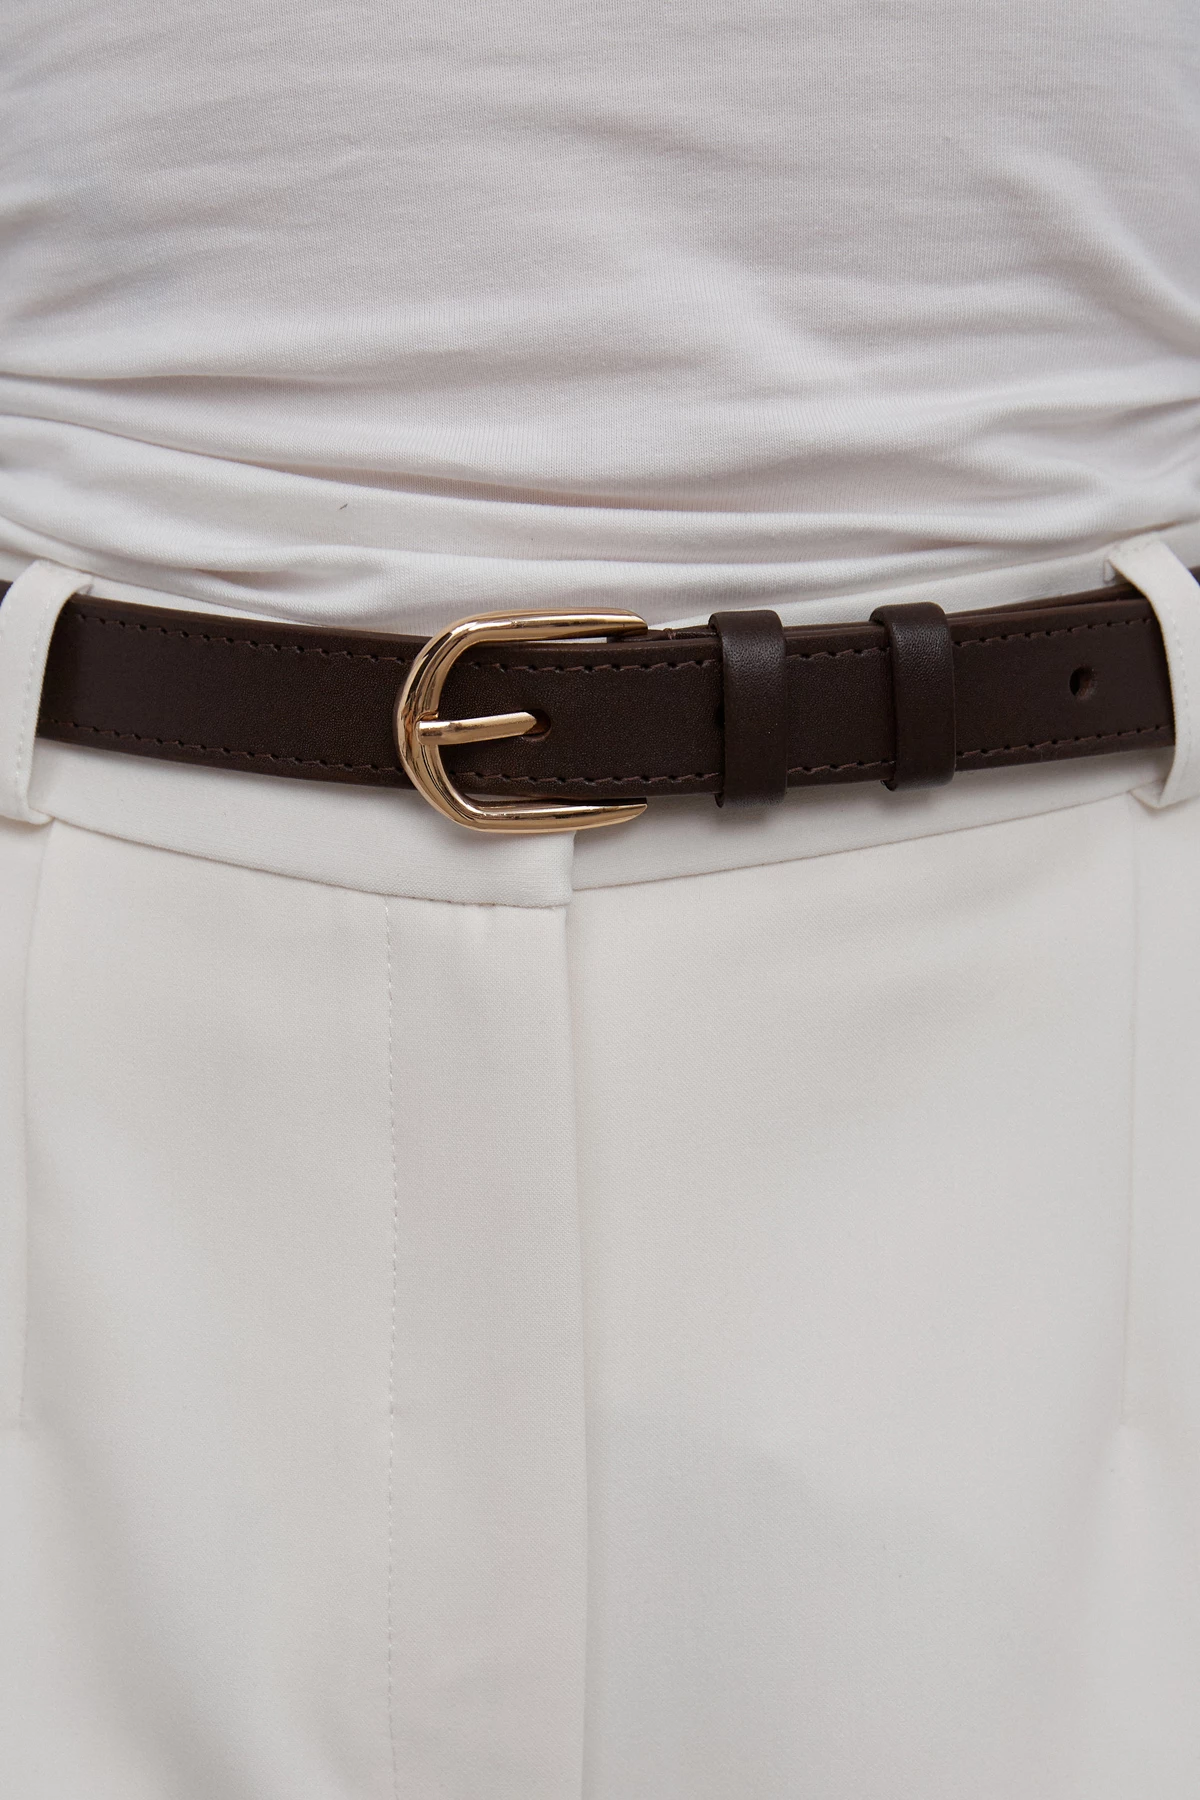 Brown leather belt with gold buckle, photo 2